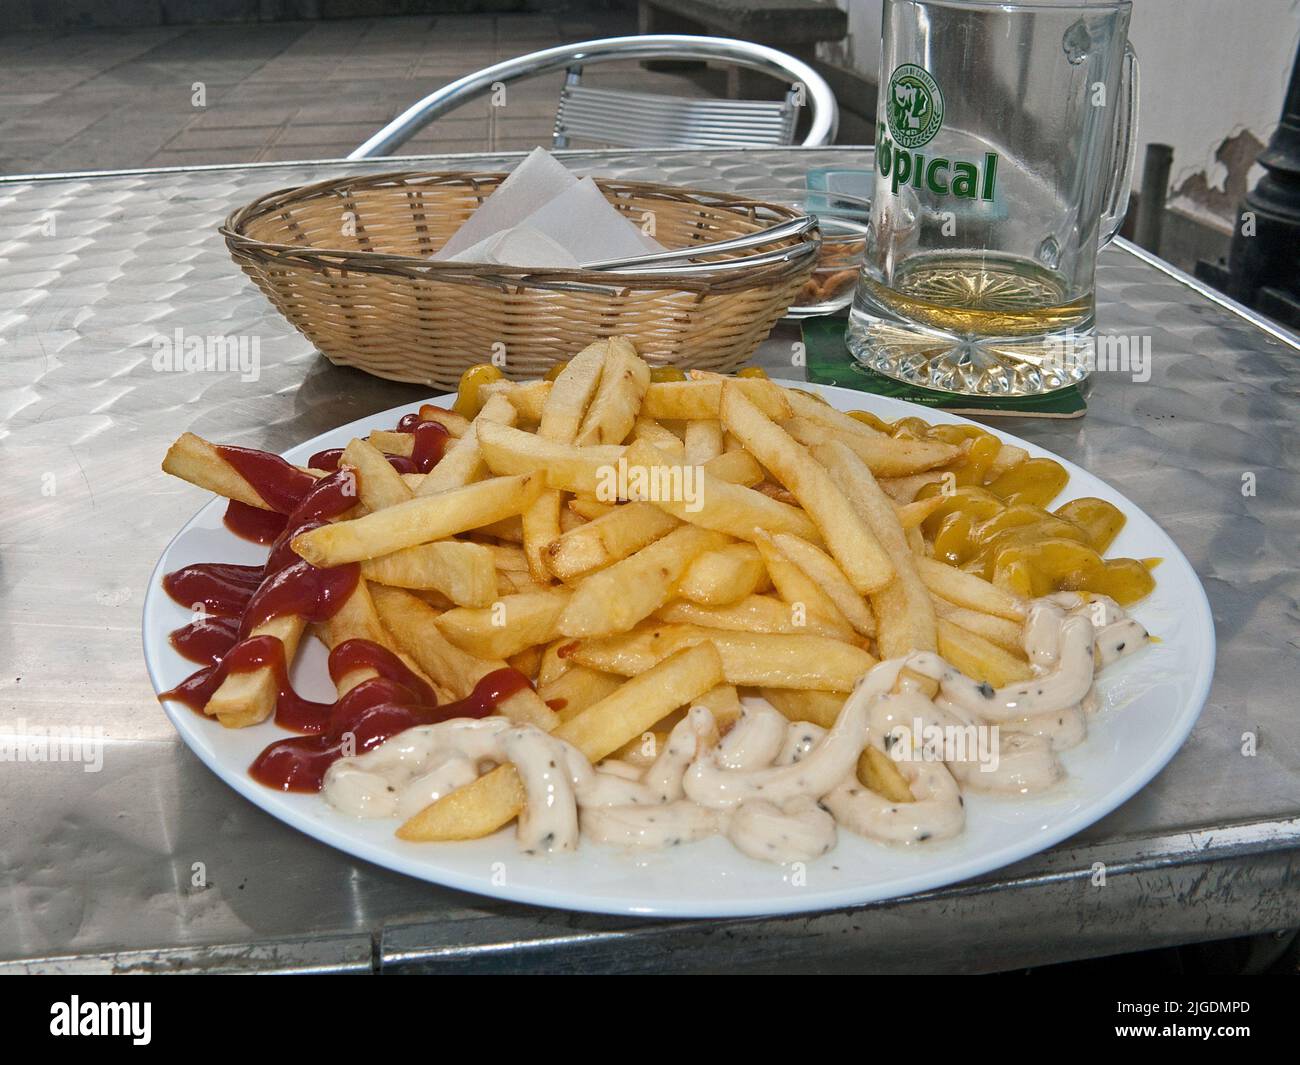 Patatine fritte con Ketschup e Mayonese, bar ad Arucas, Grand Canary, Isole Canarie, Spagna, Europa Foto Stock